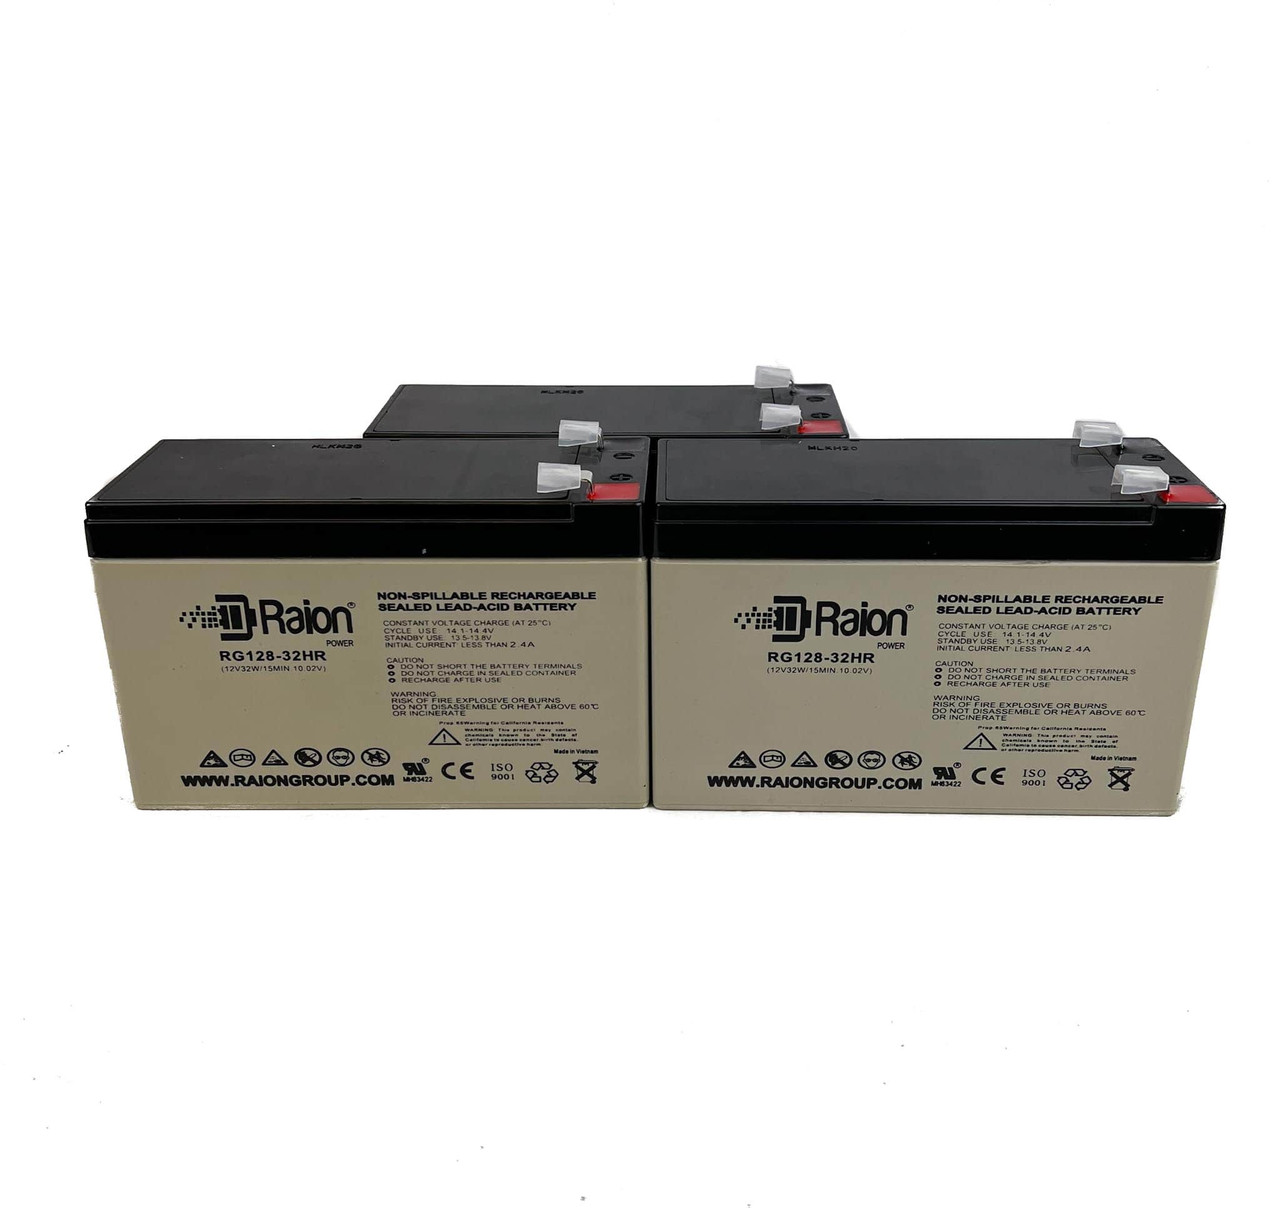 Raion Power 12V 7.5Ah High Rate Discharge UPS Batteries for Powerware PW9120 1000 - 3 Pack